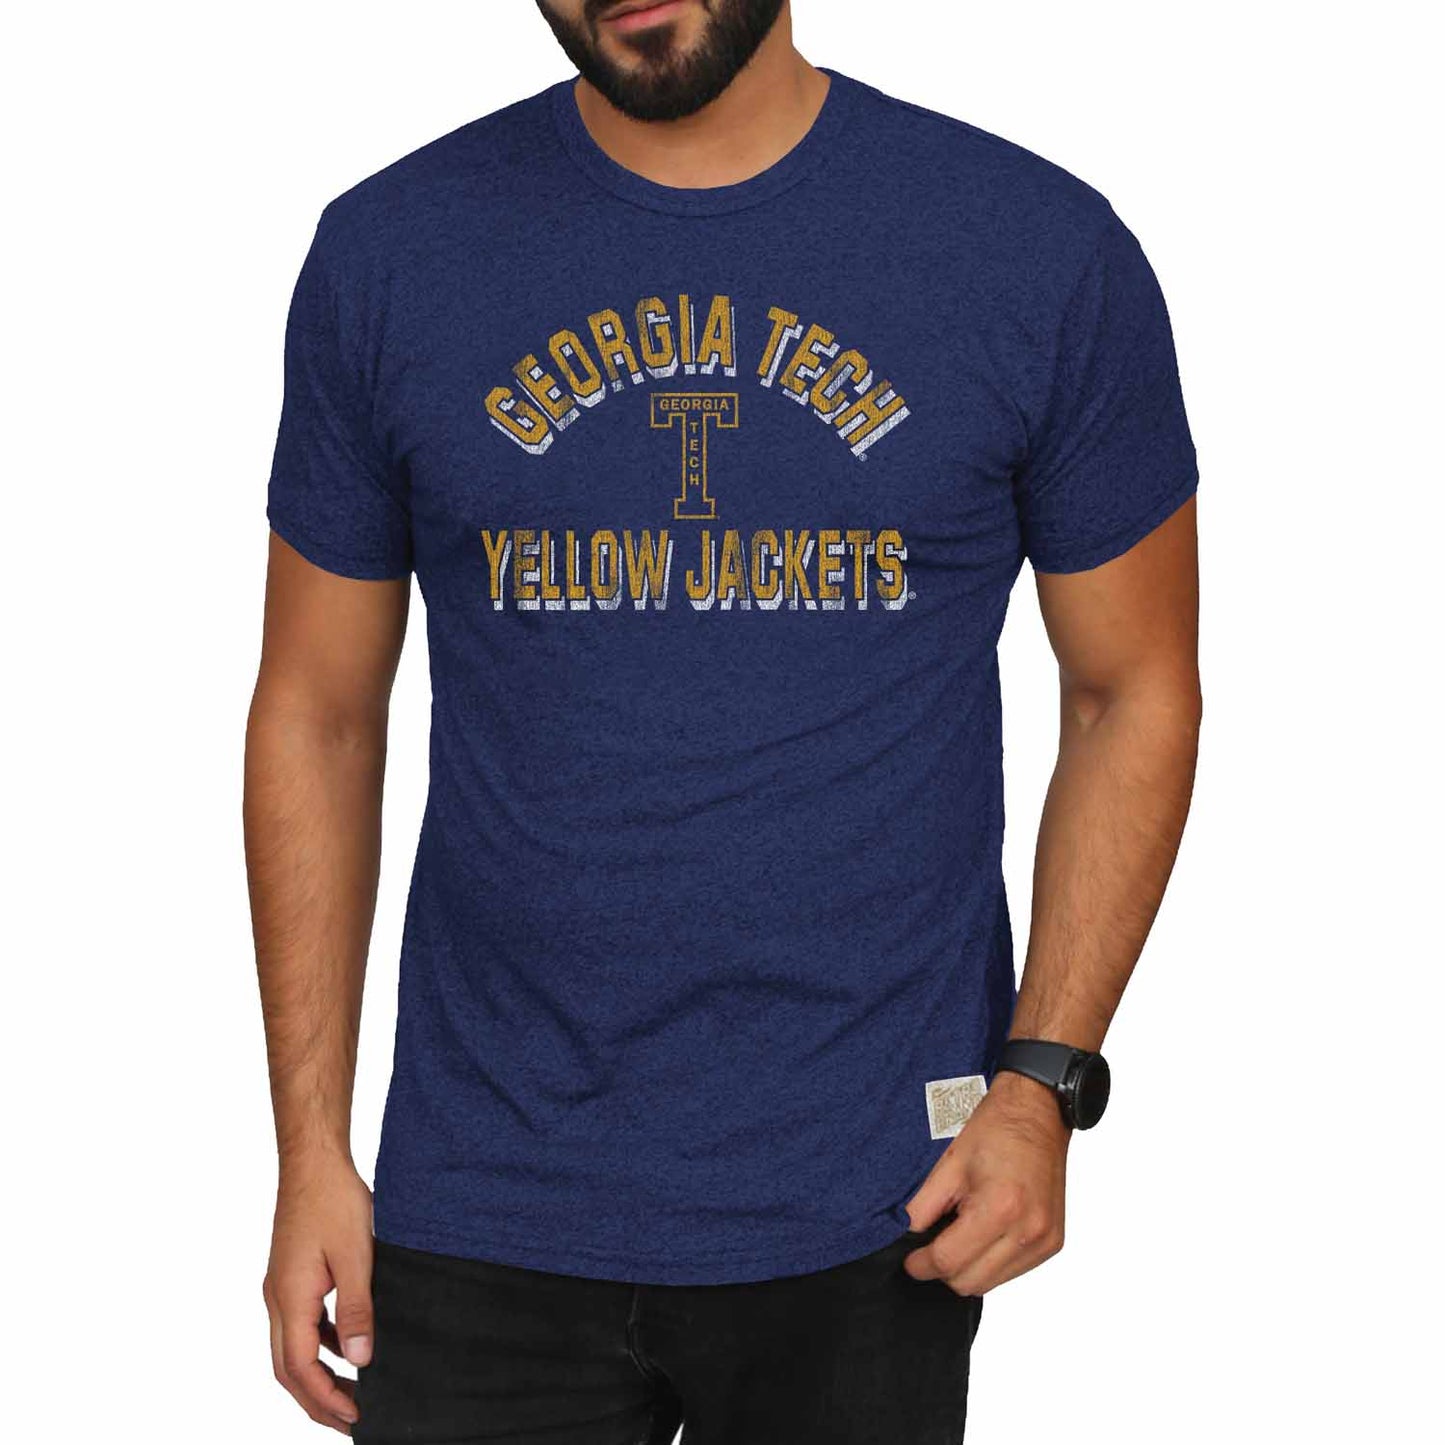 Georgia Tech Yellowjackets Adult College Team Color T-Shirt - Navy